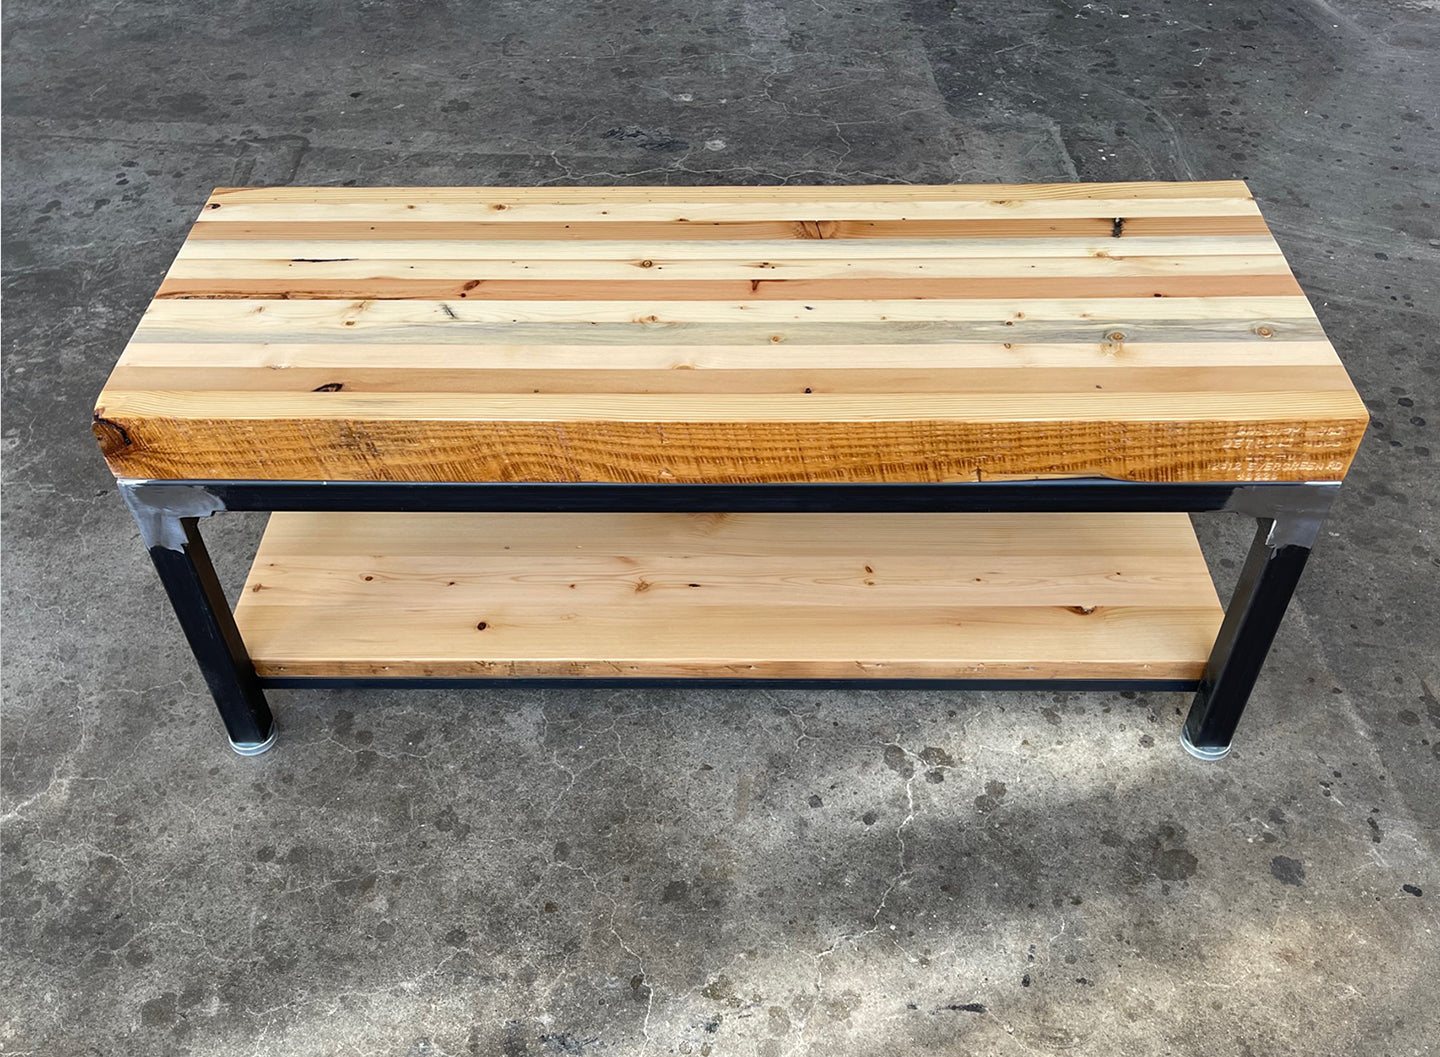 Grand Boulevard Reclaimed Wood Entry Bench - Natural Finish